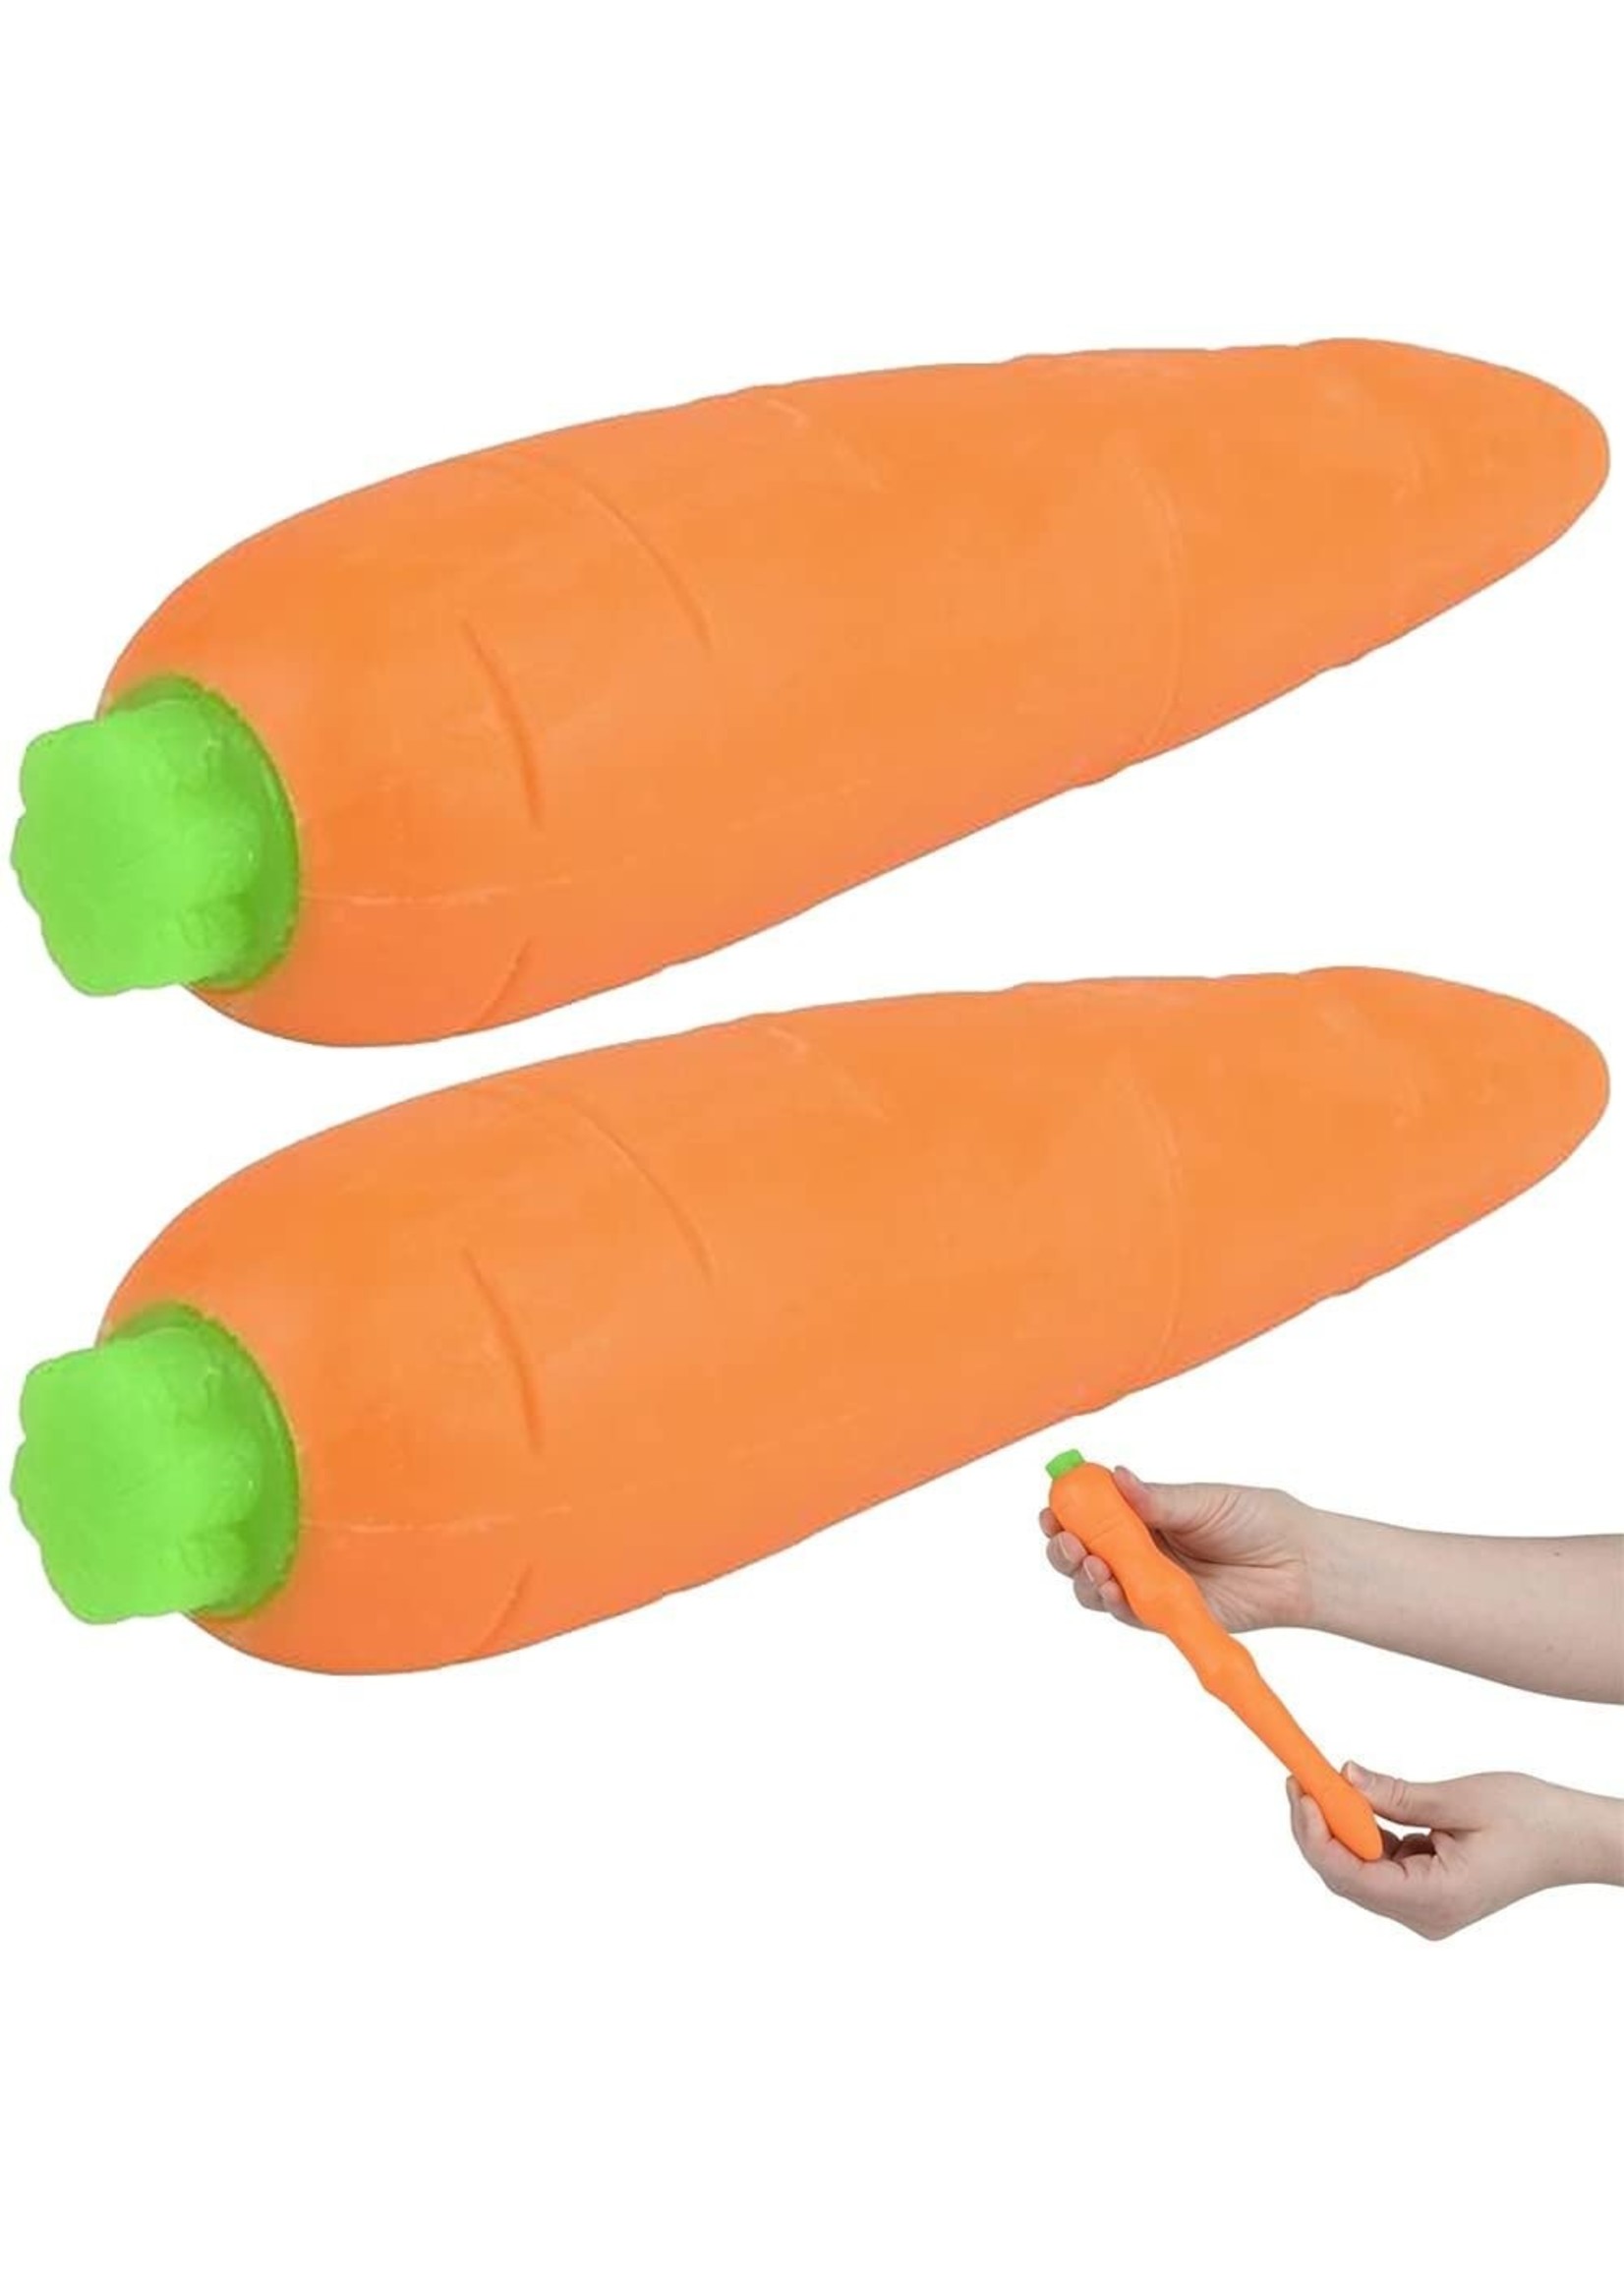 Toy Network Stretch and Squeeze Carrot